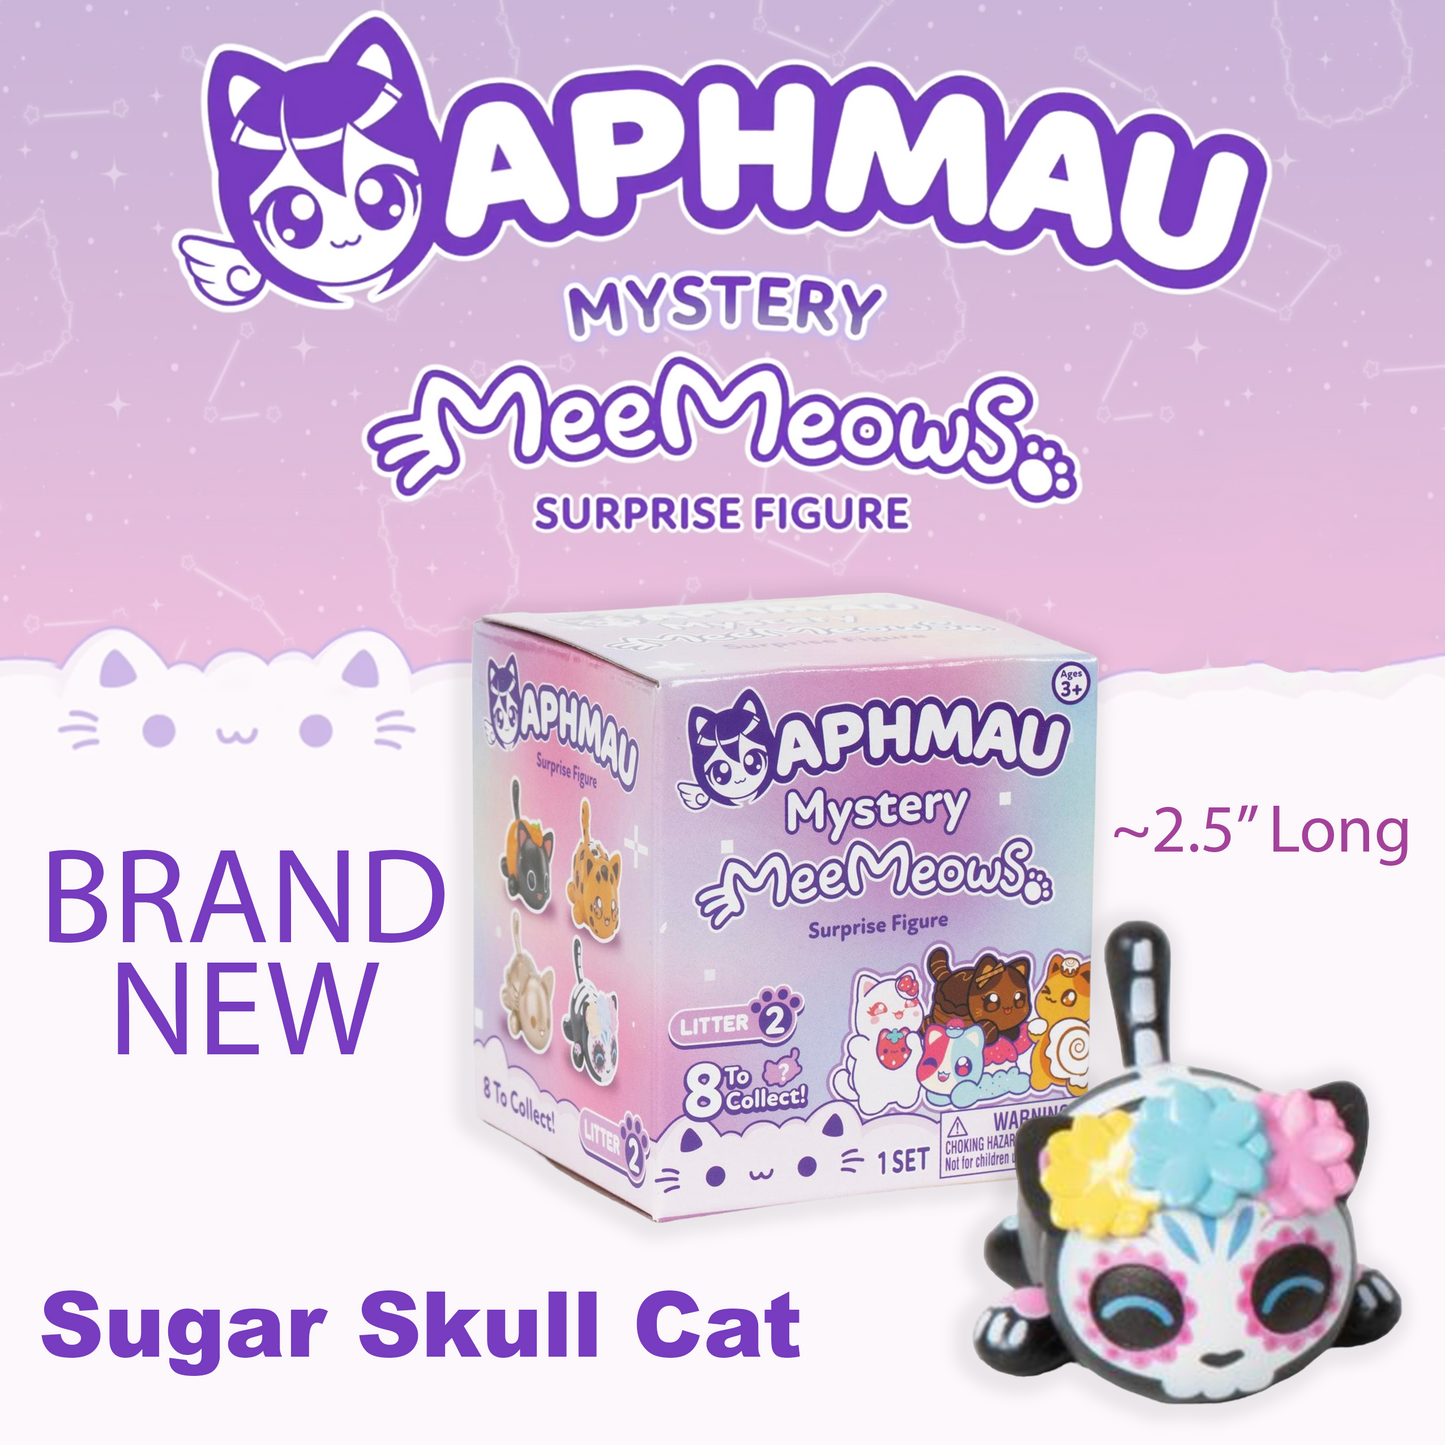 PANCAKE CAT - MeeMeows Mystery Cat Figure from Aphmau (NEW) Litter 2 Collectible